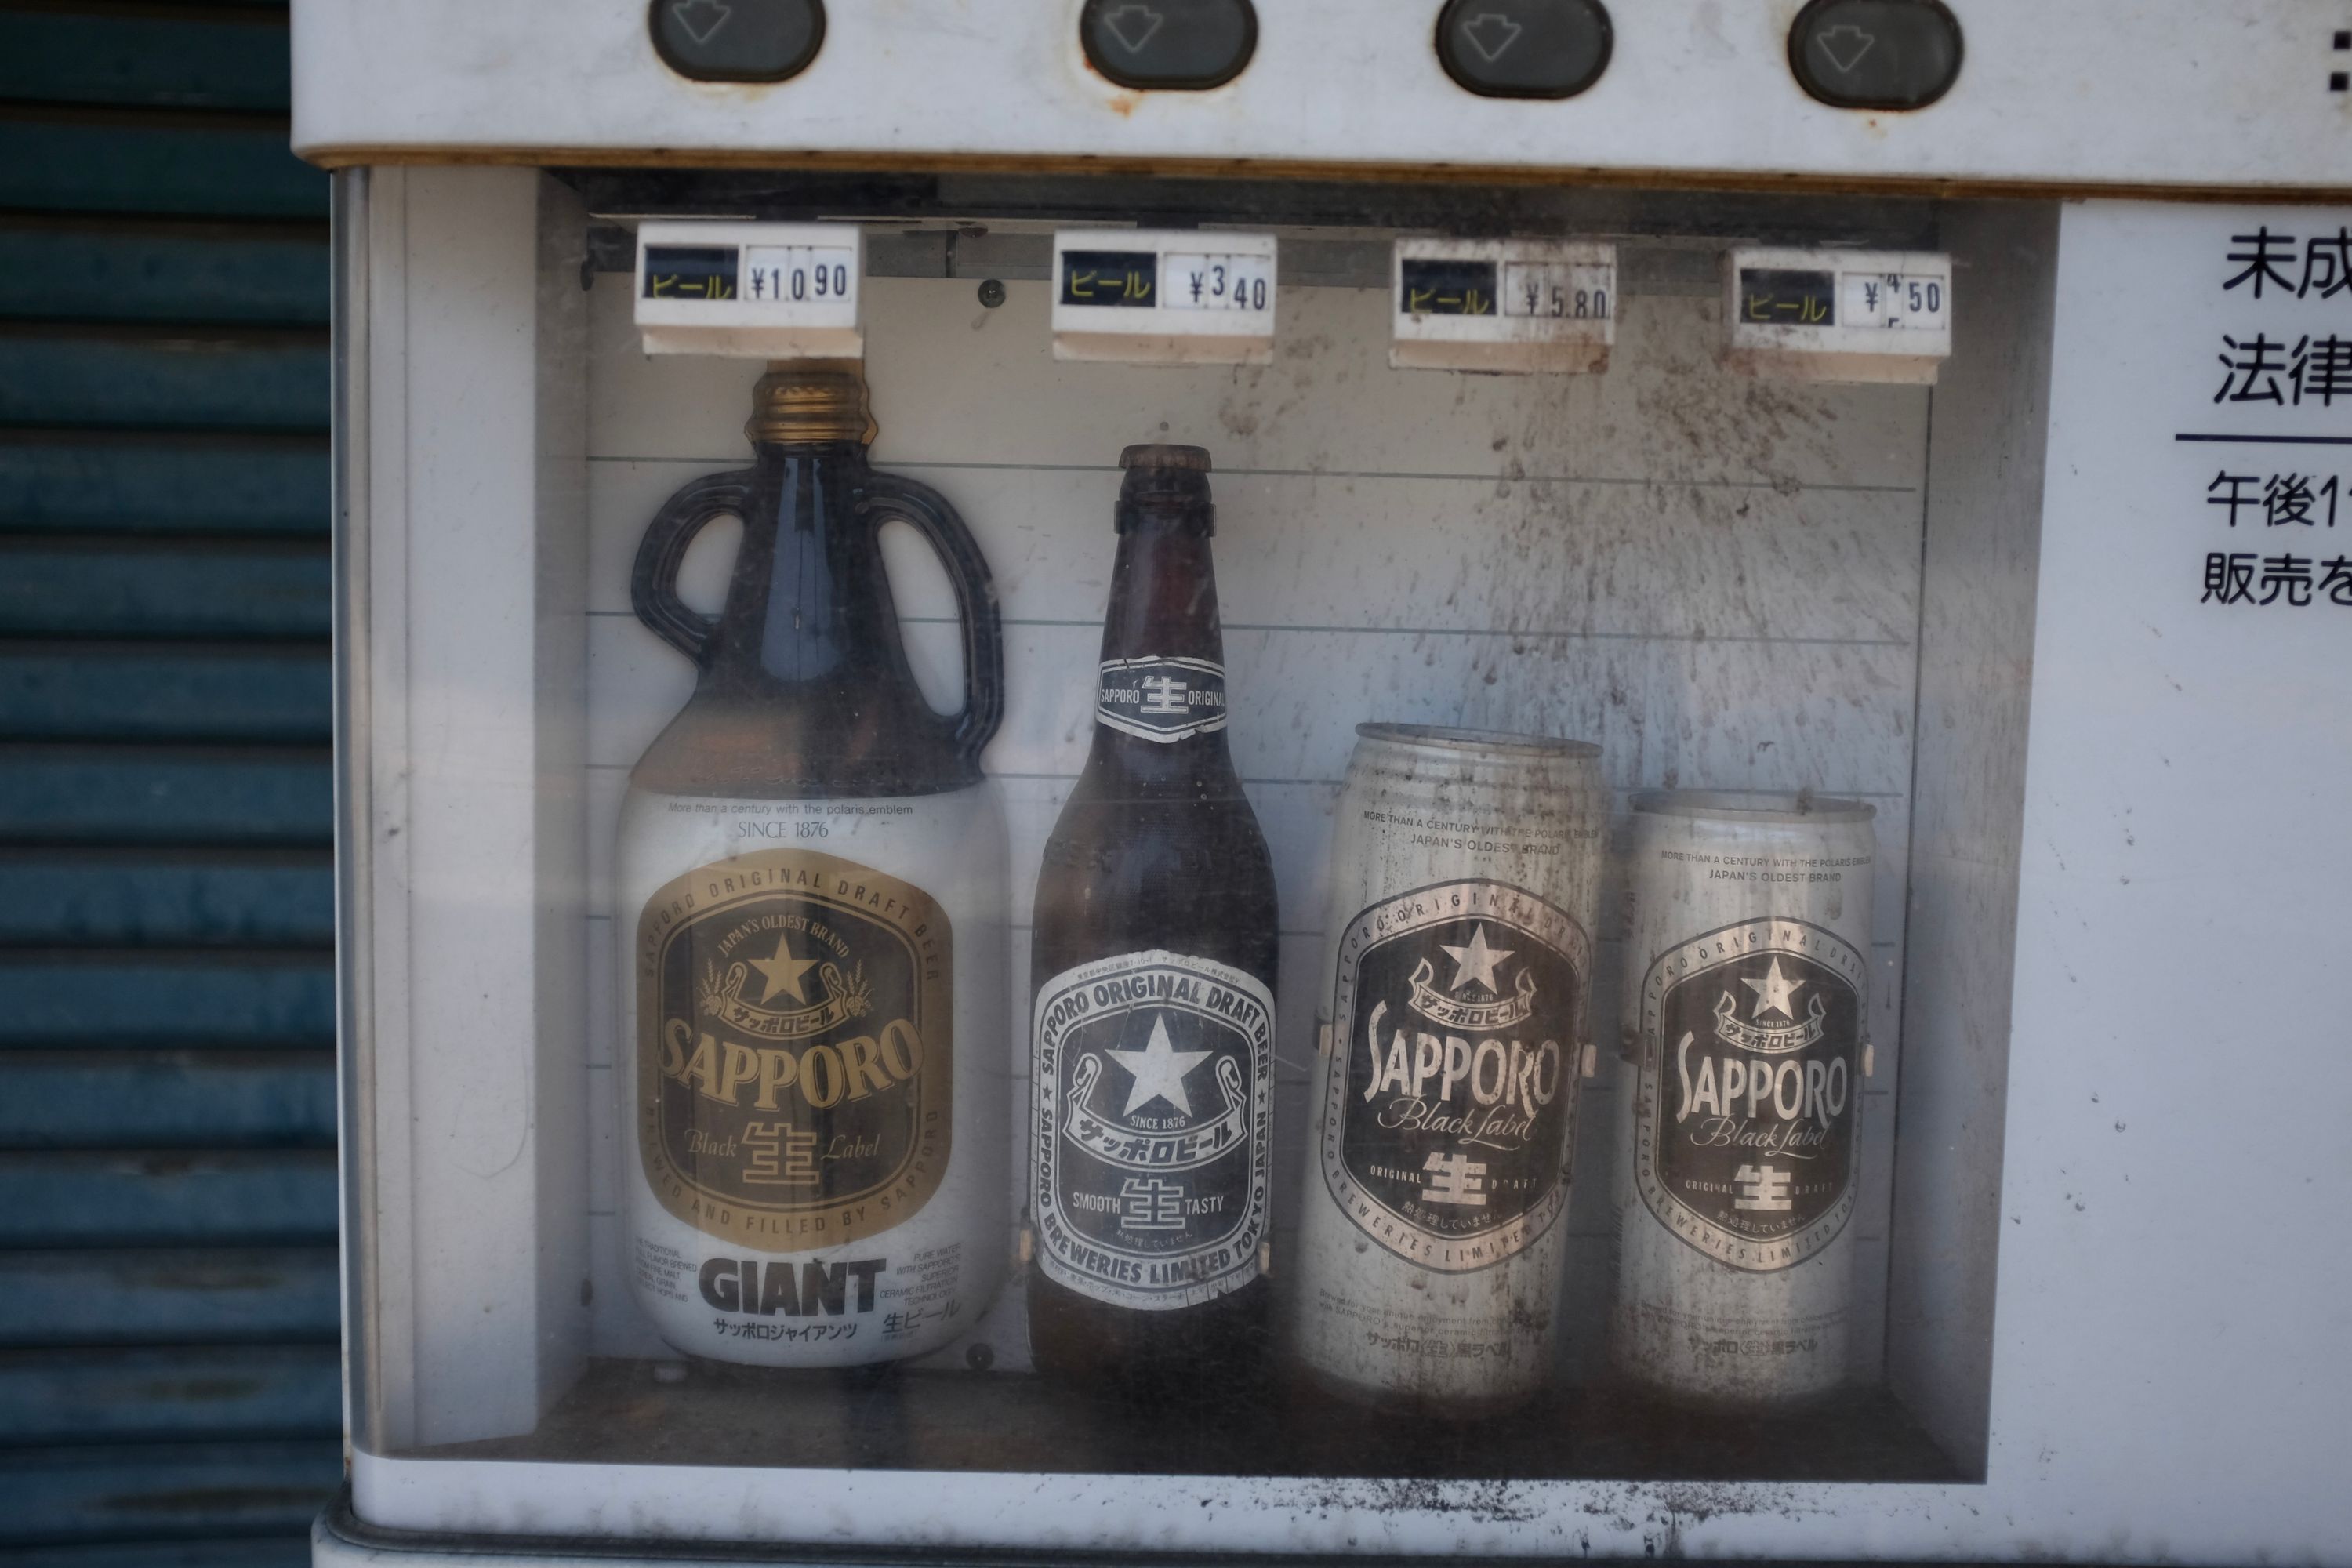 Bottles and cans of Sapporo beer in a vending machine.